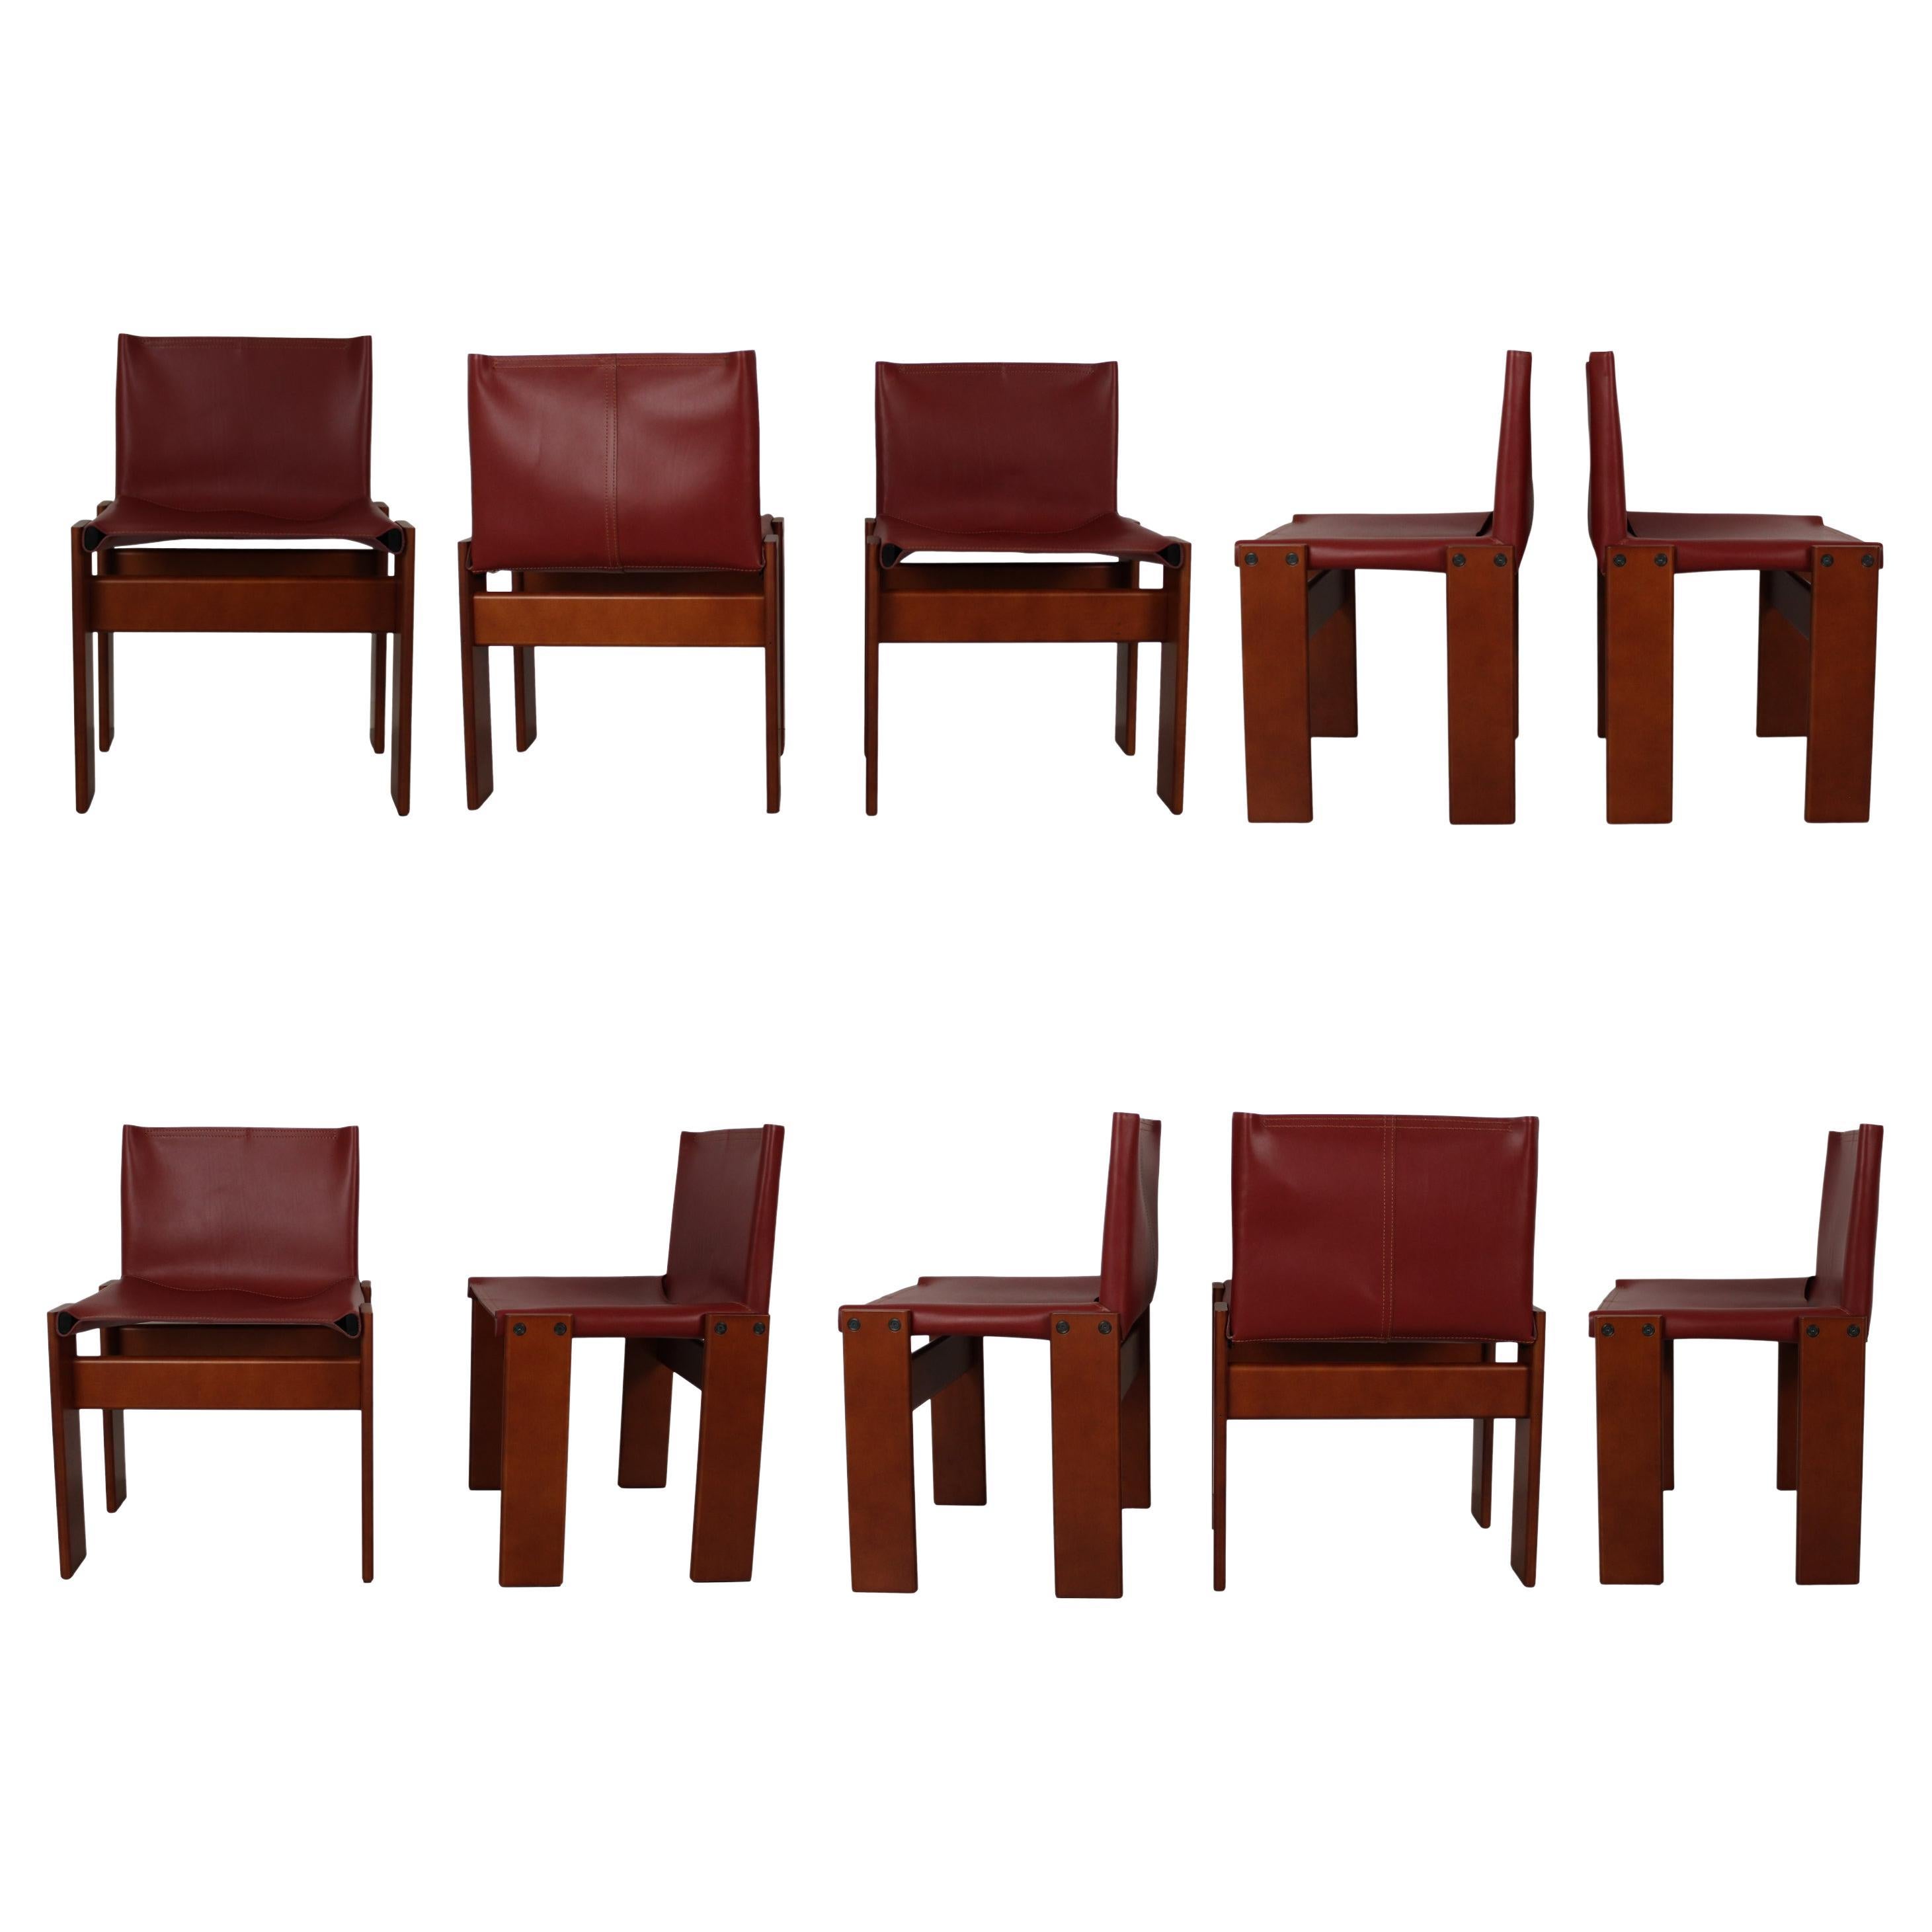 Afra & Tobia Scarpa English Red Leather Monk Dining Chair for Molteni, Set of 10